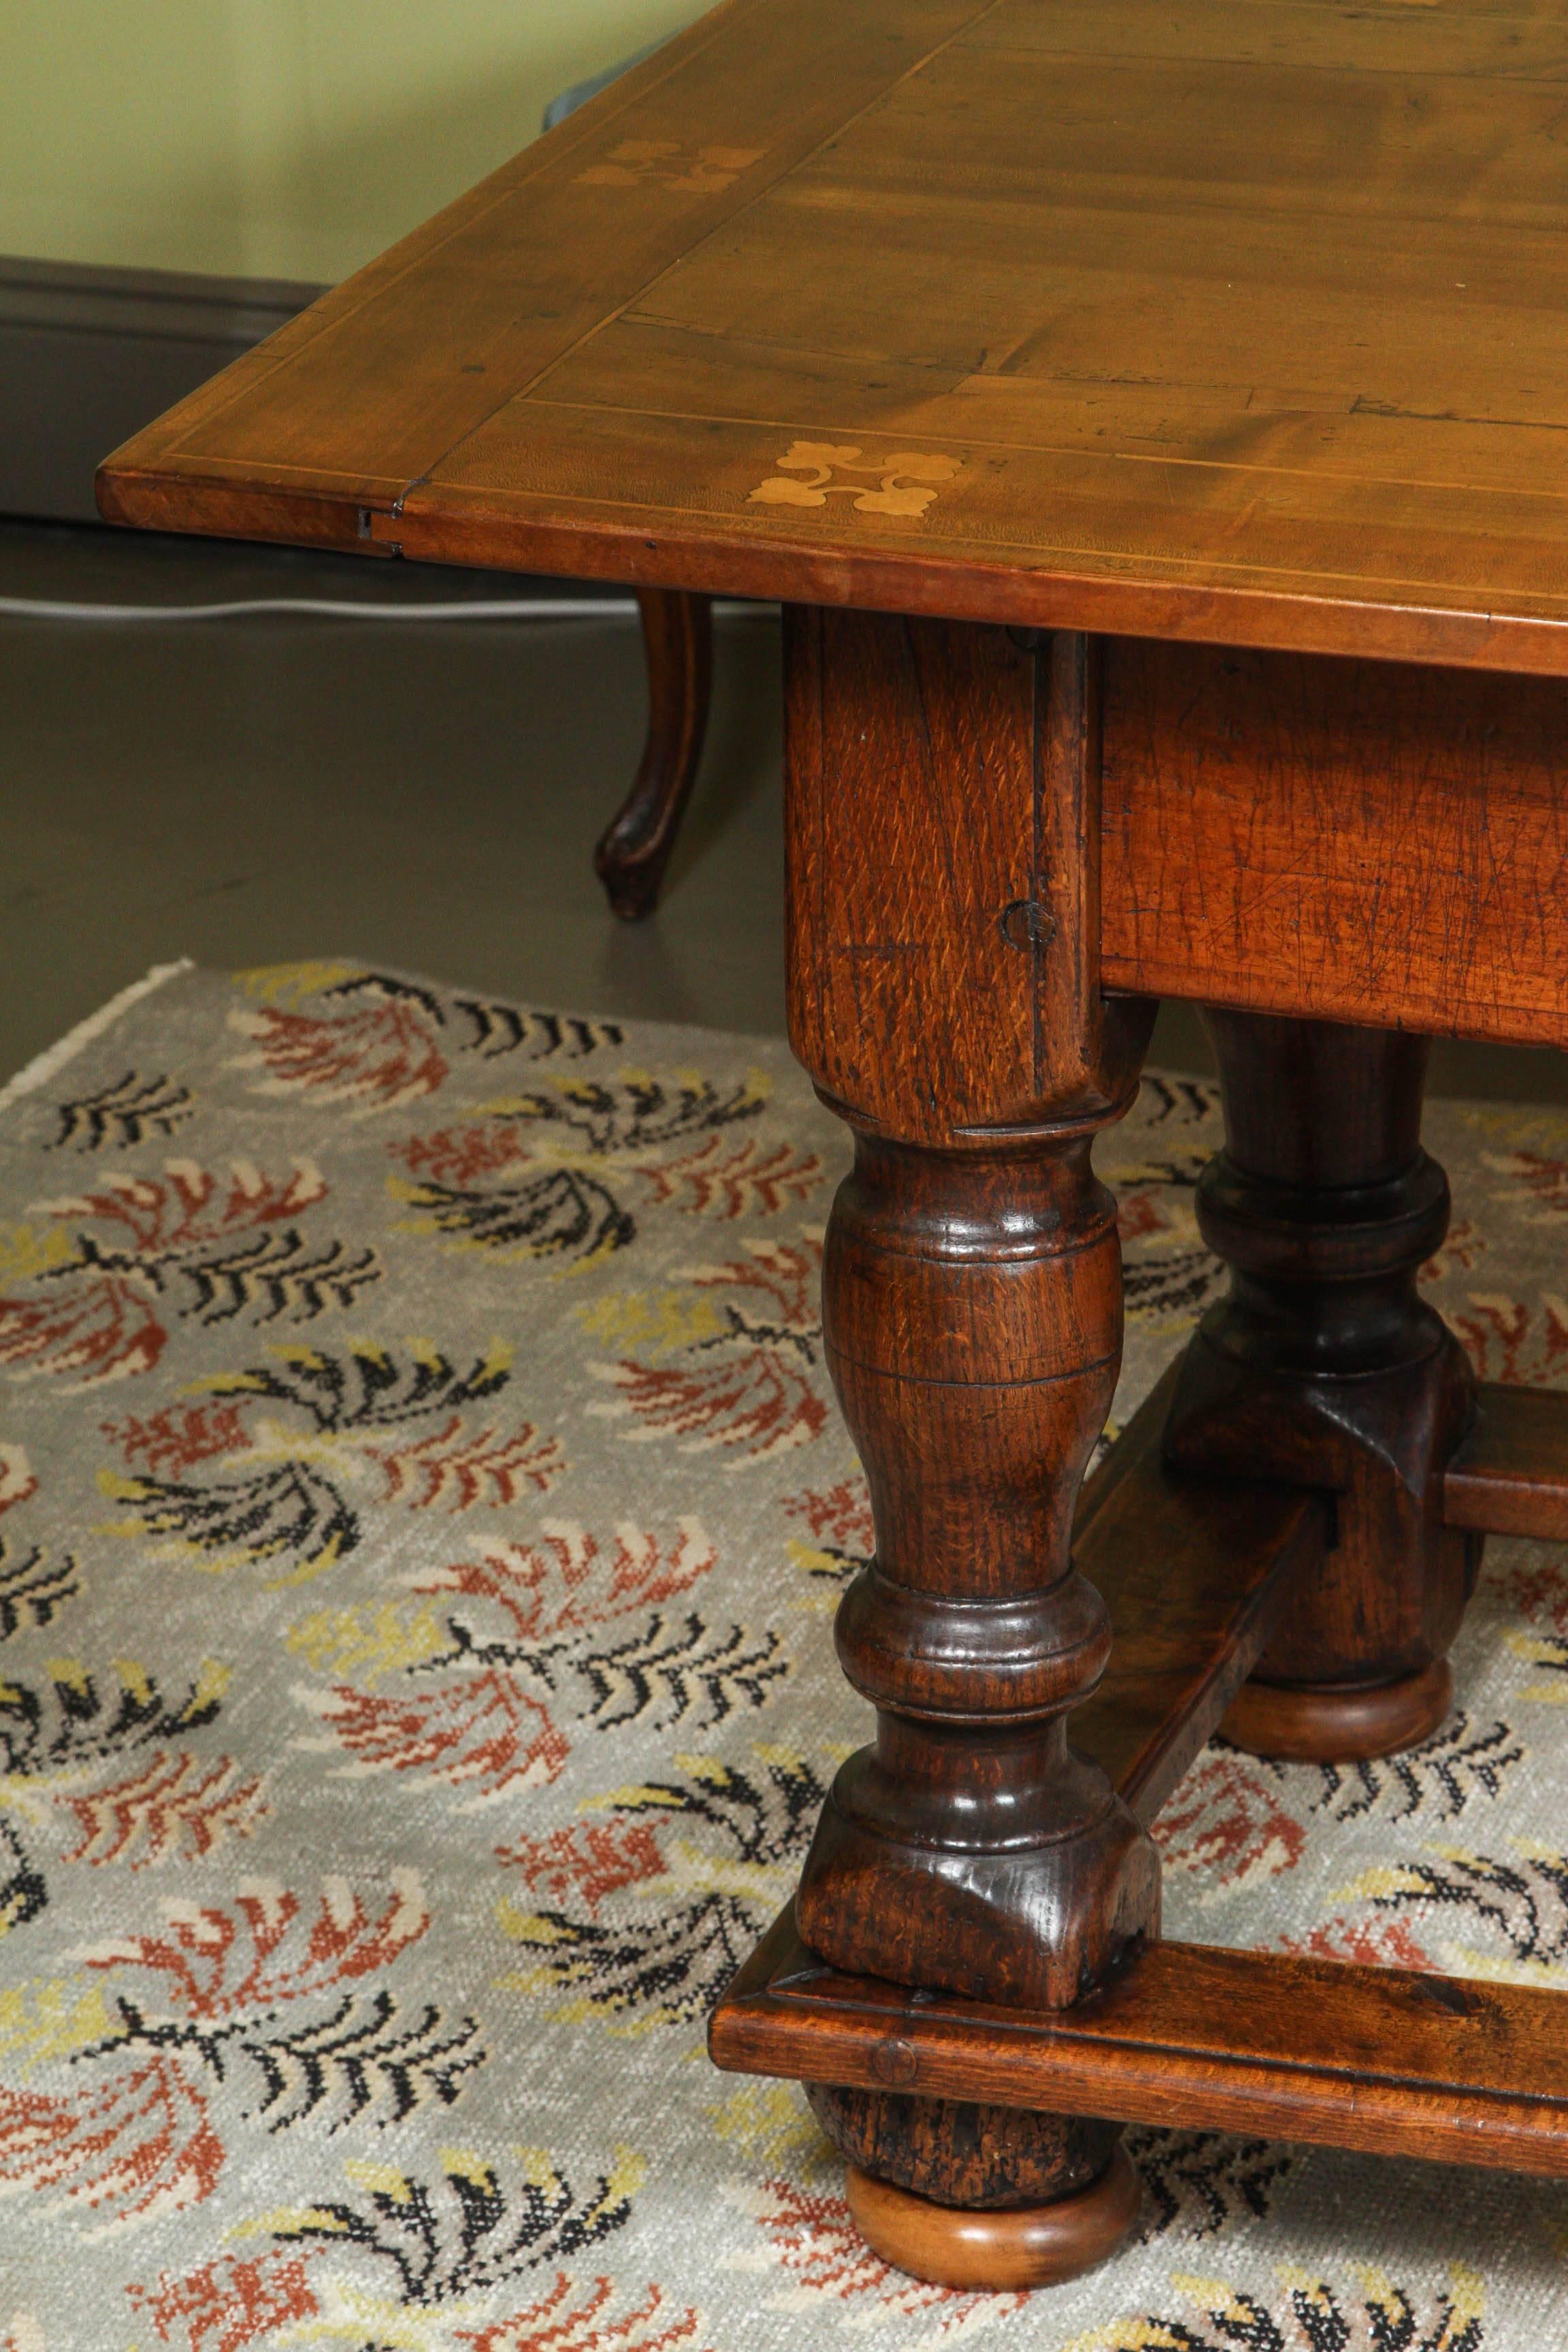 South German walnut Refectory table with beautifully inlaid top and carved drawers, dated 1765.